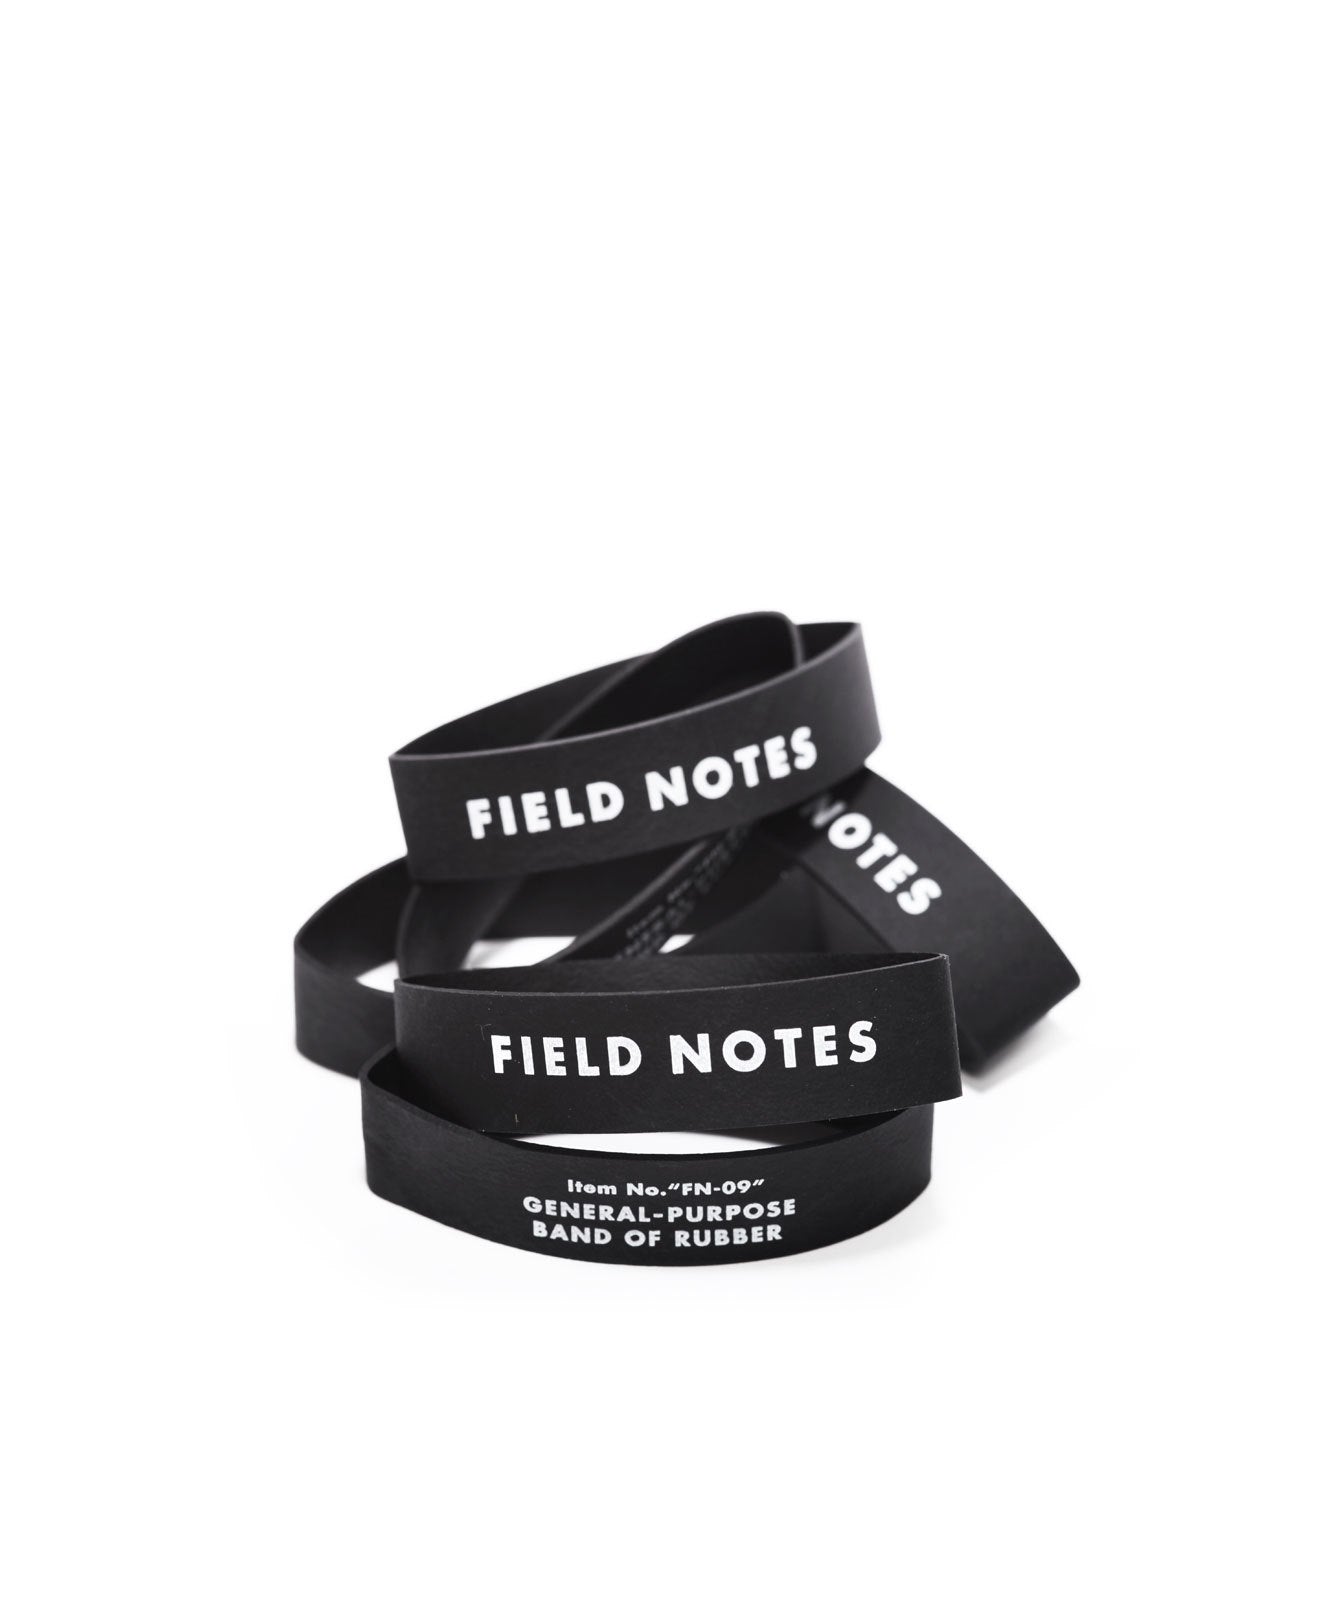 FIELD NOTES Band of Rubber